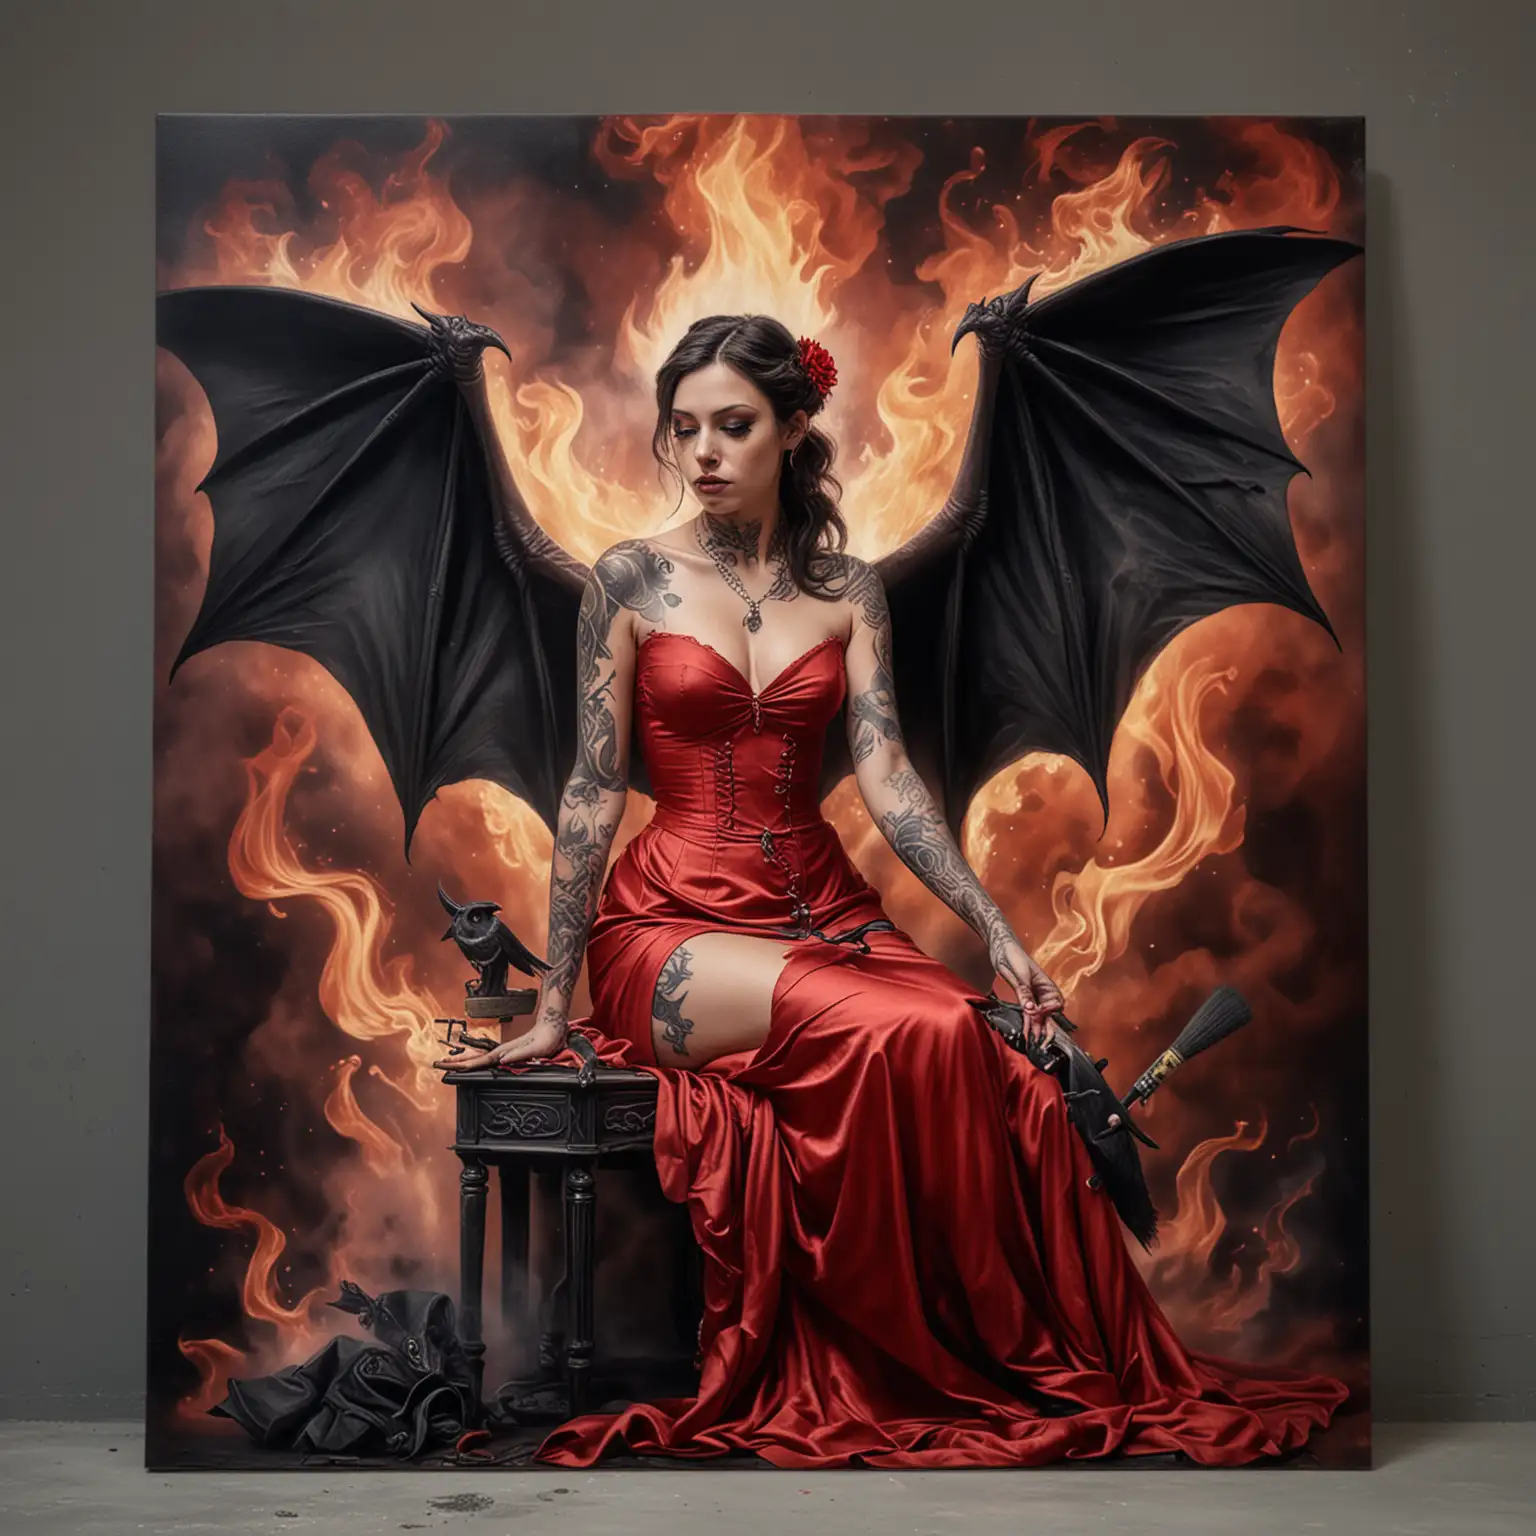 Tattooed Angel Artist Painting on Canvas with Bat Wings and Red Dress